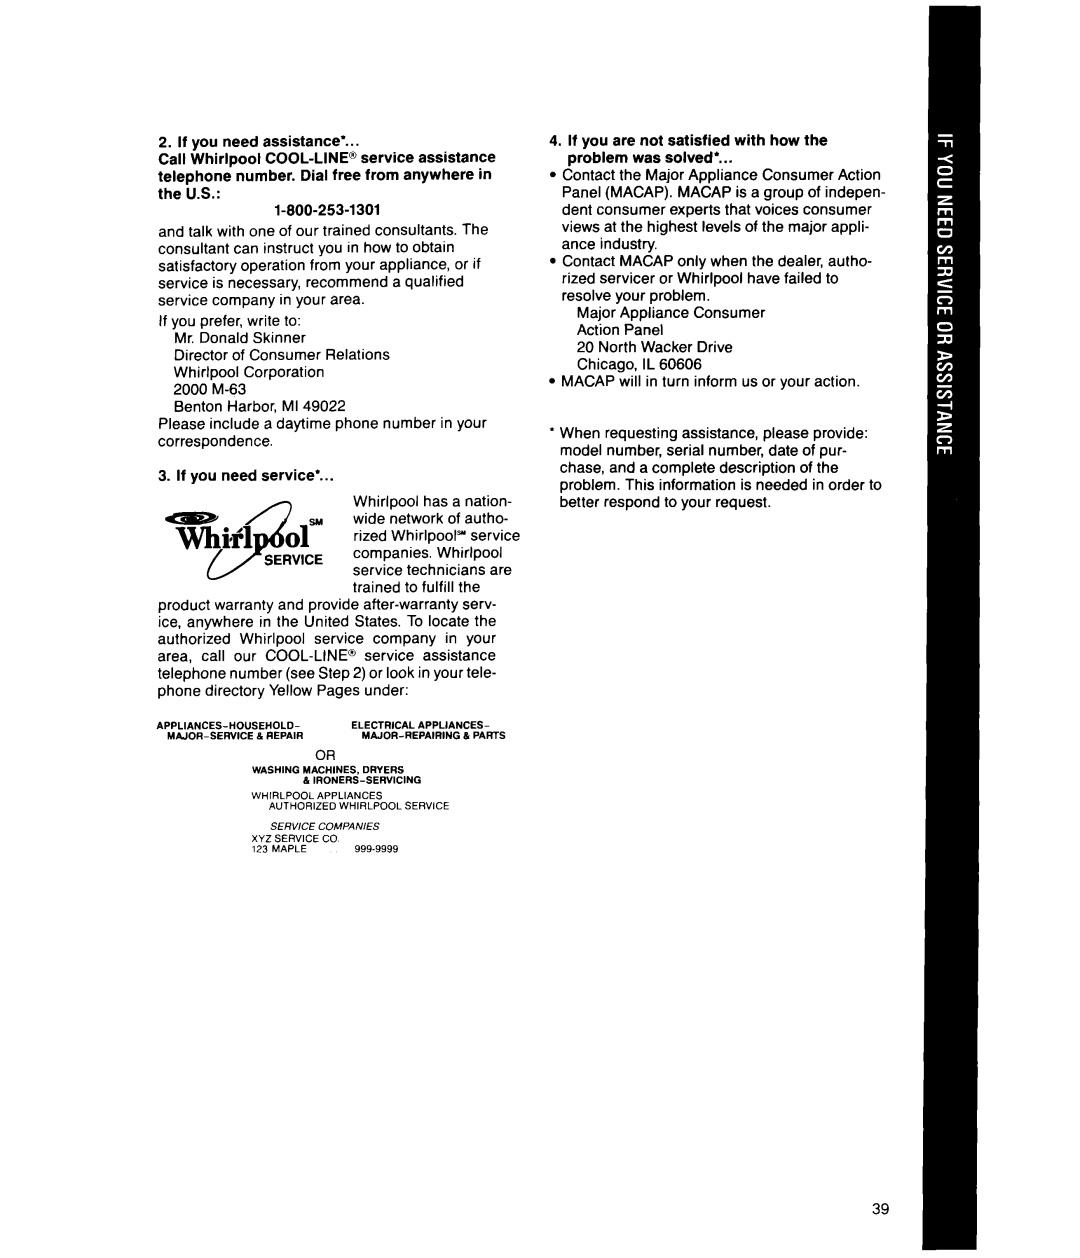 Whirlpool MS2101XW, MS2100XW manual If you need assistance’ 